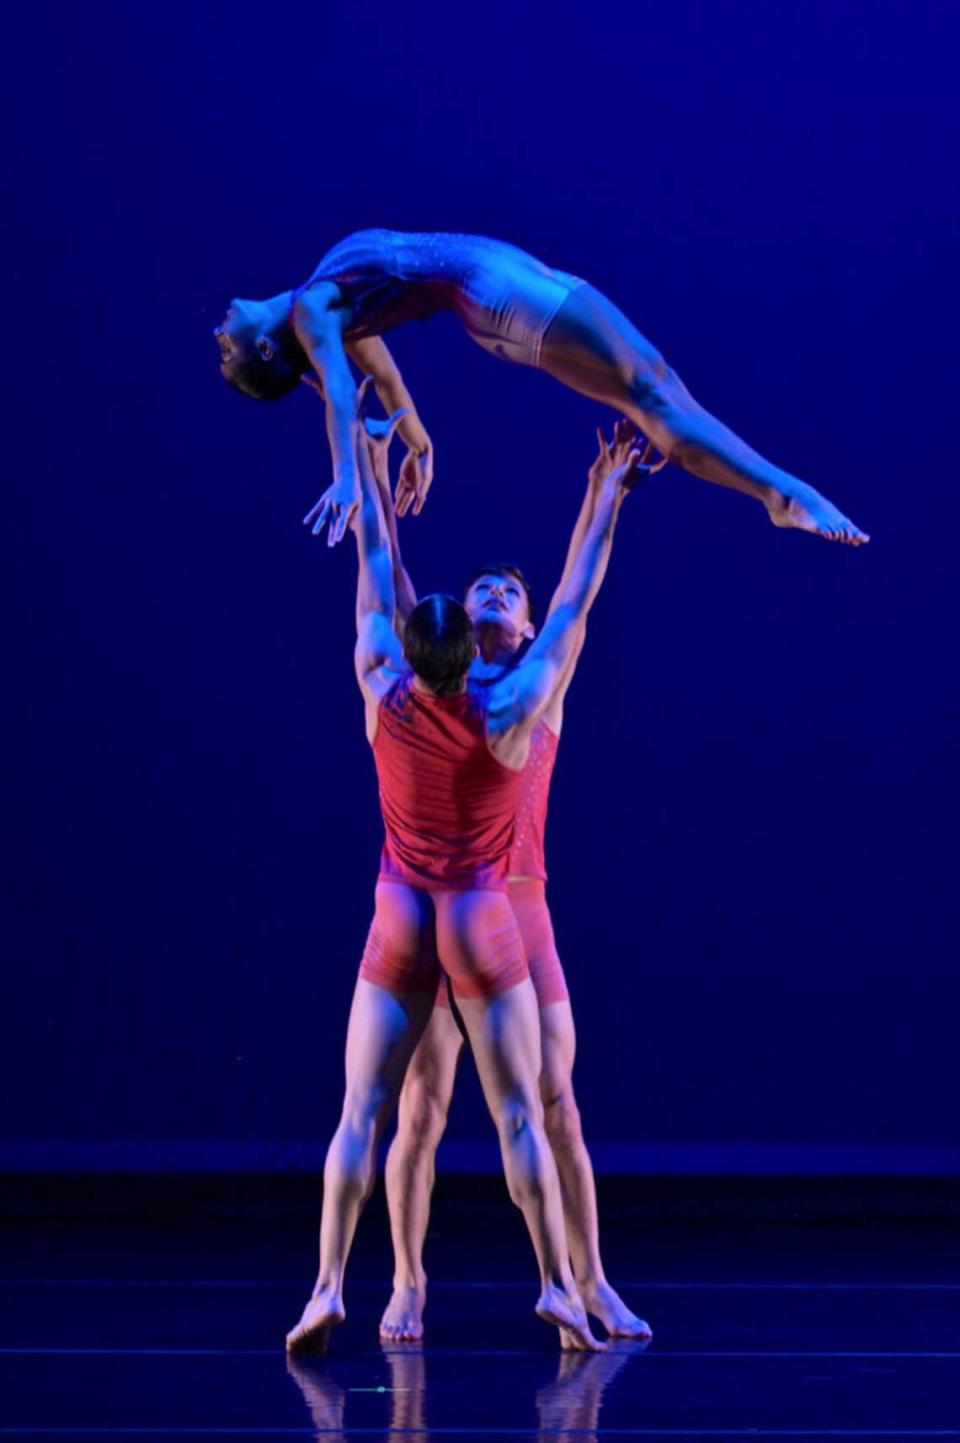 David Harris, David Jewett and Fatima Andere in ‘Solstice,’ by Jon Lehrer. Photo by Simon Soong/Dance Now! Miami.